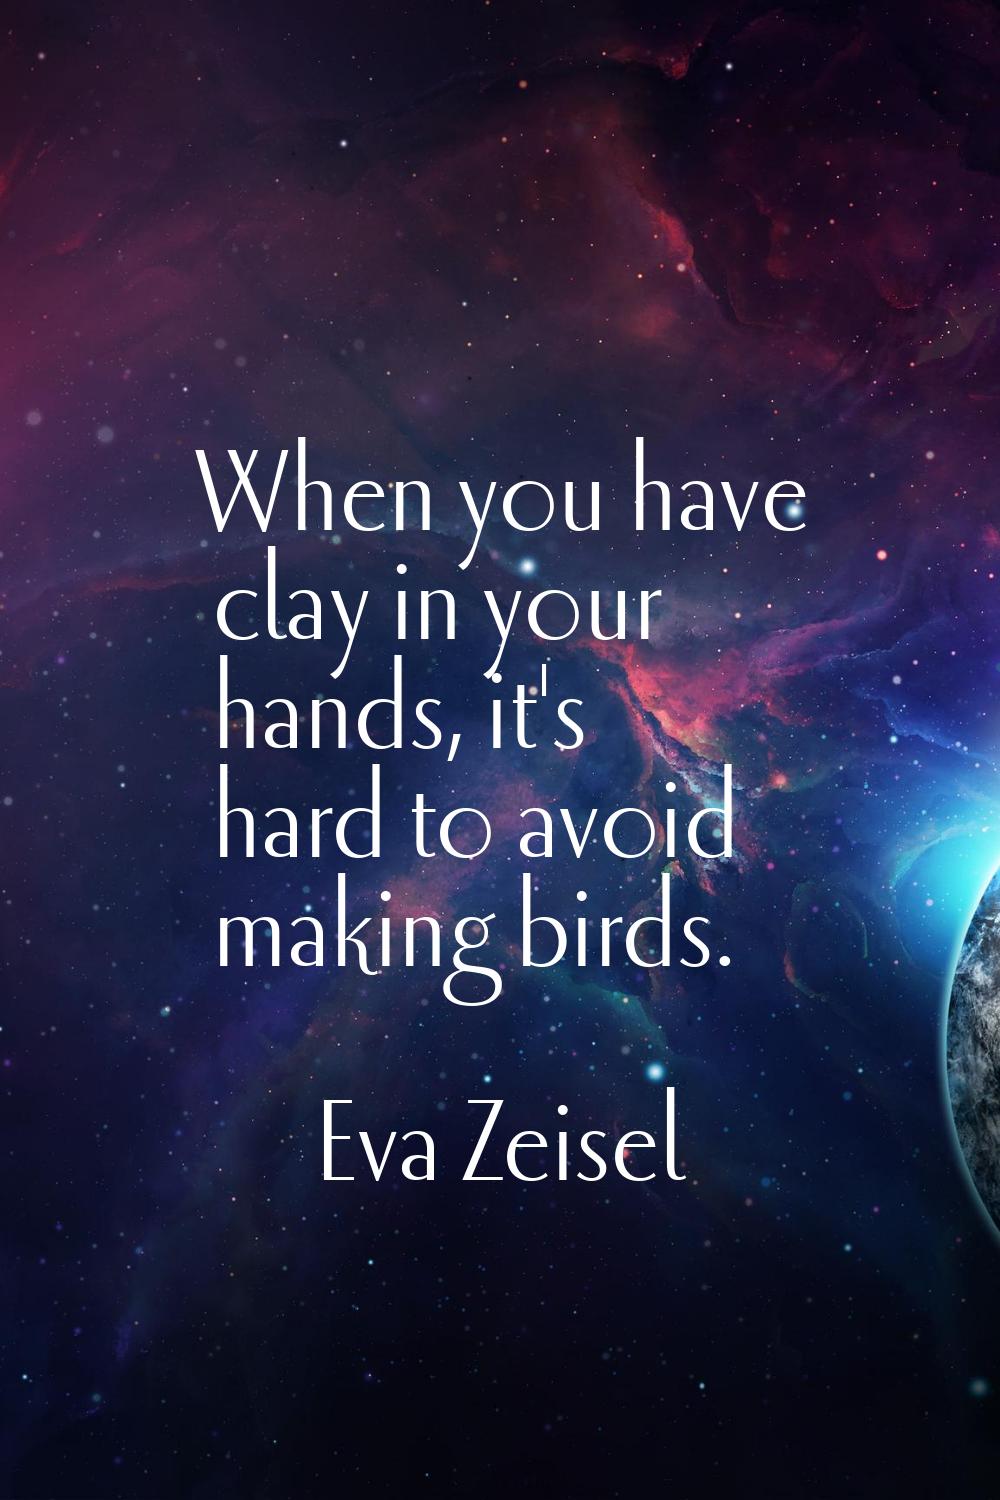 When you have clay in your hands, it's hard to avoid making birds.